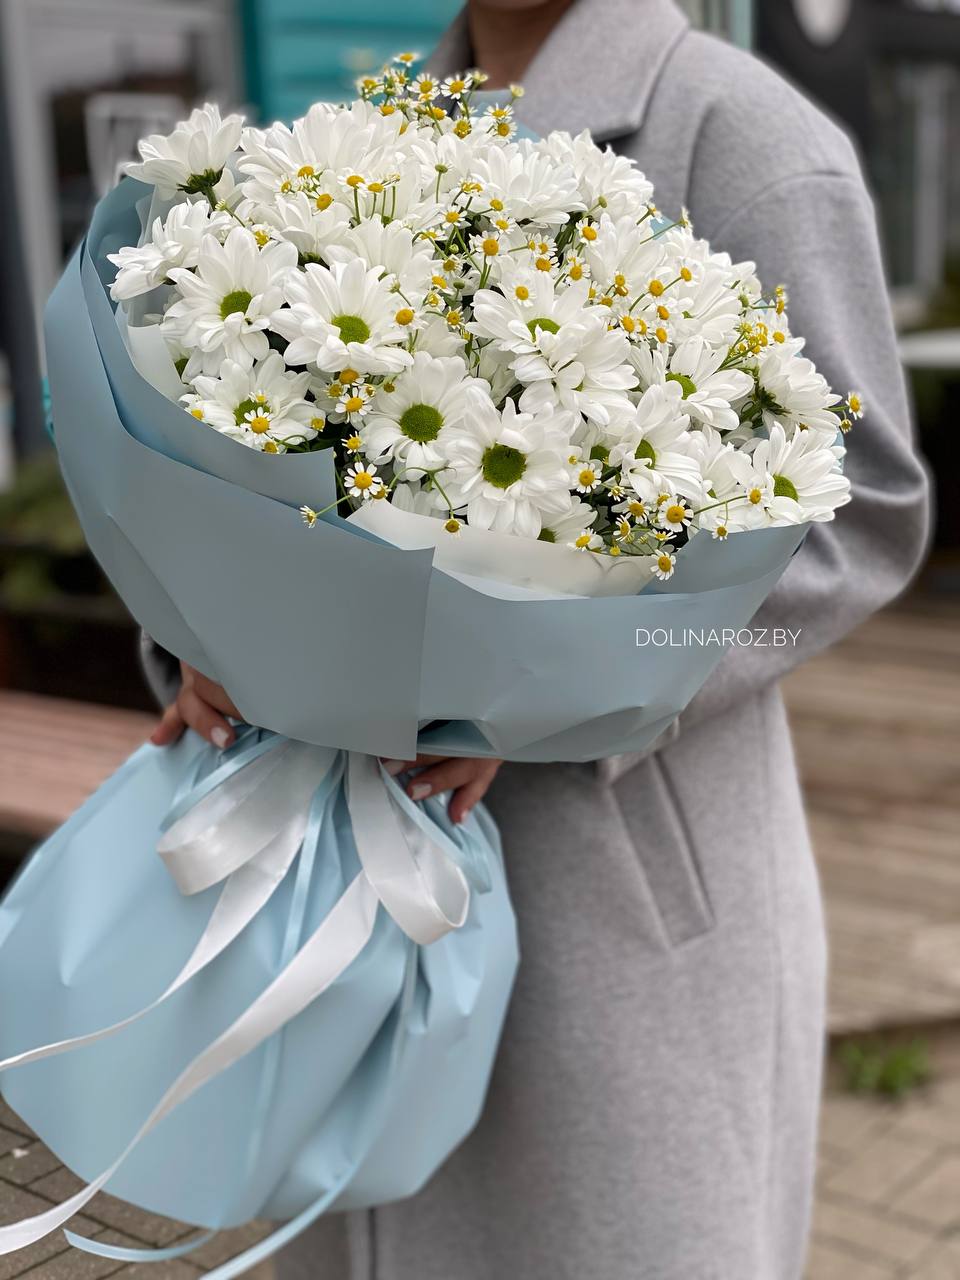 Bouquet "Mix of daisies"